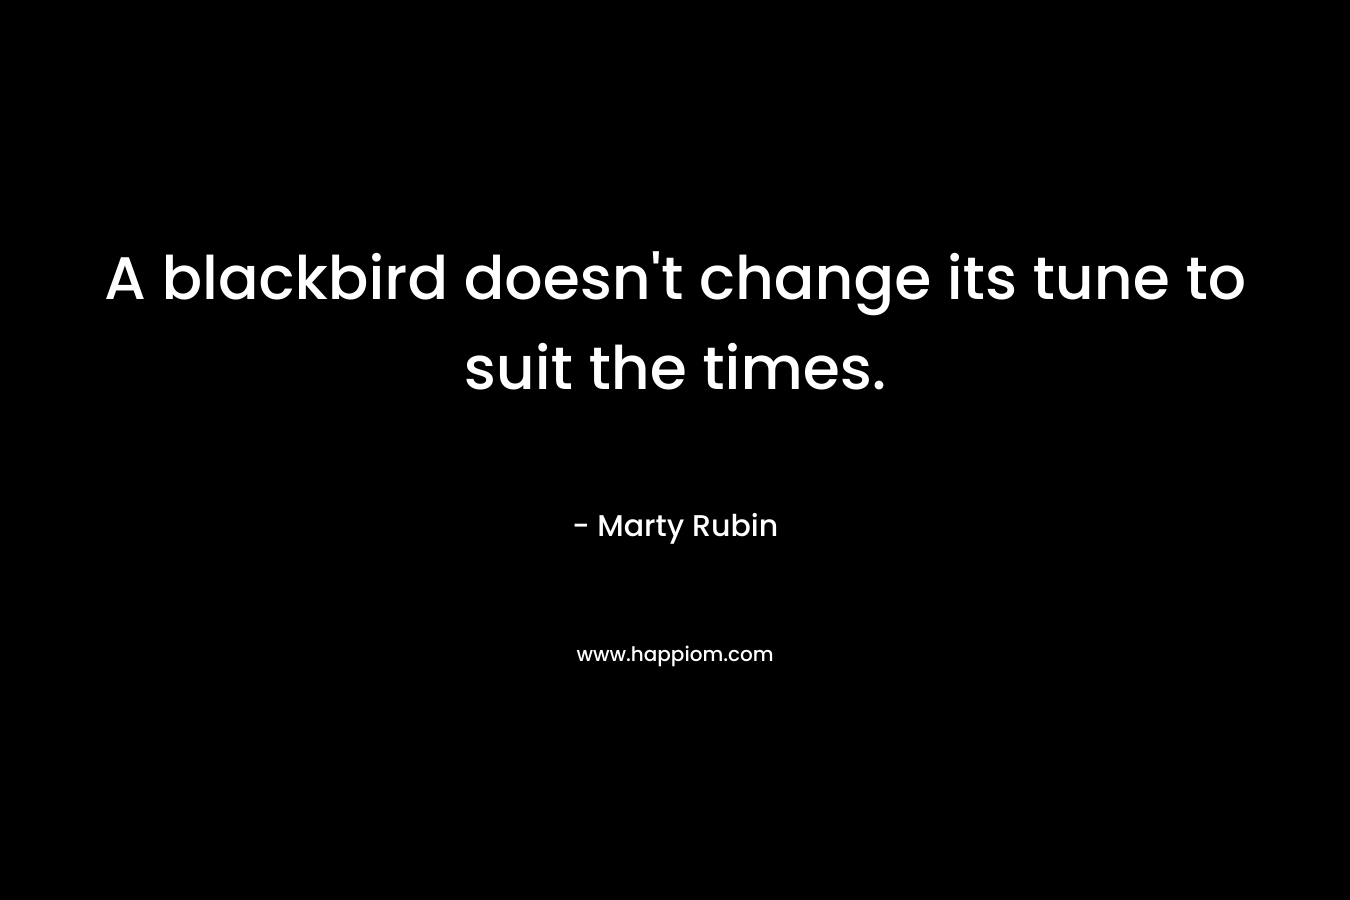 A blackbird doesn't change its tune to suit the times.